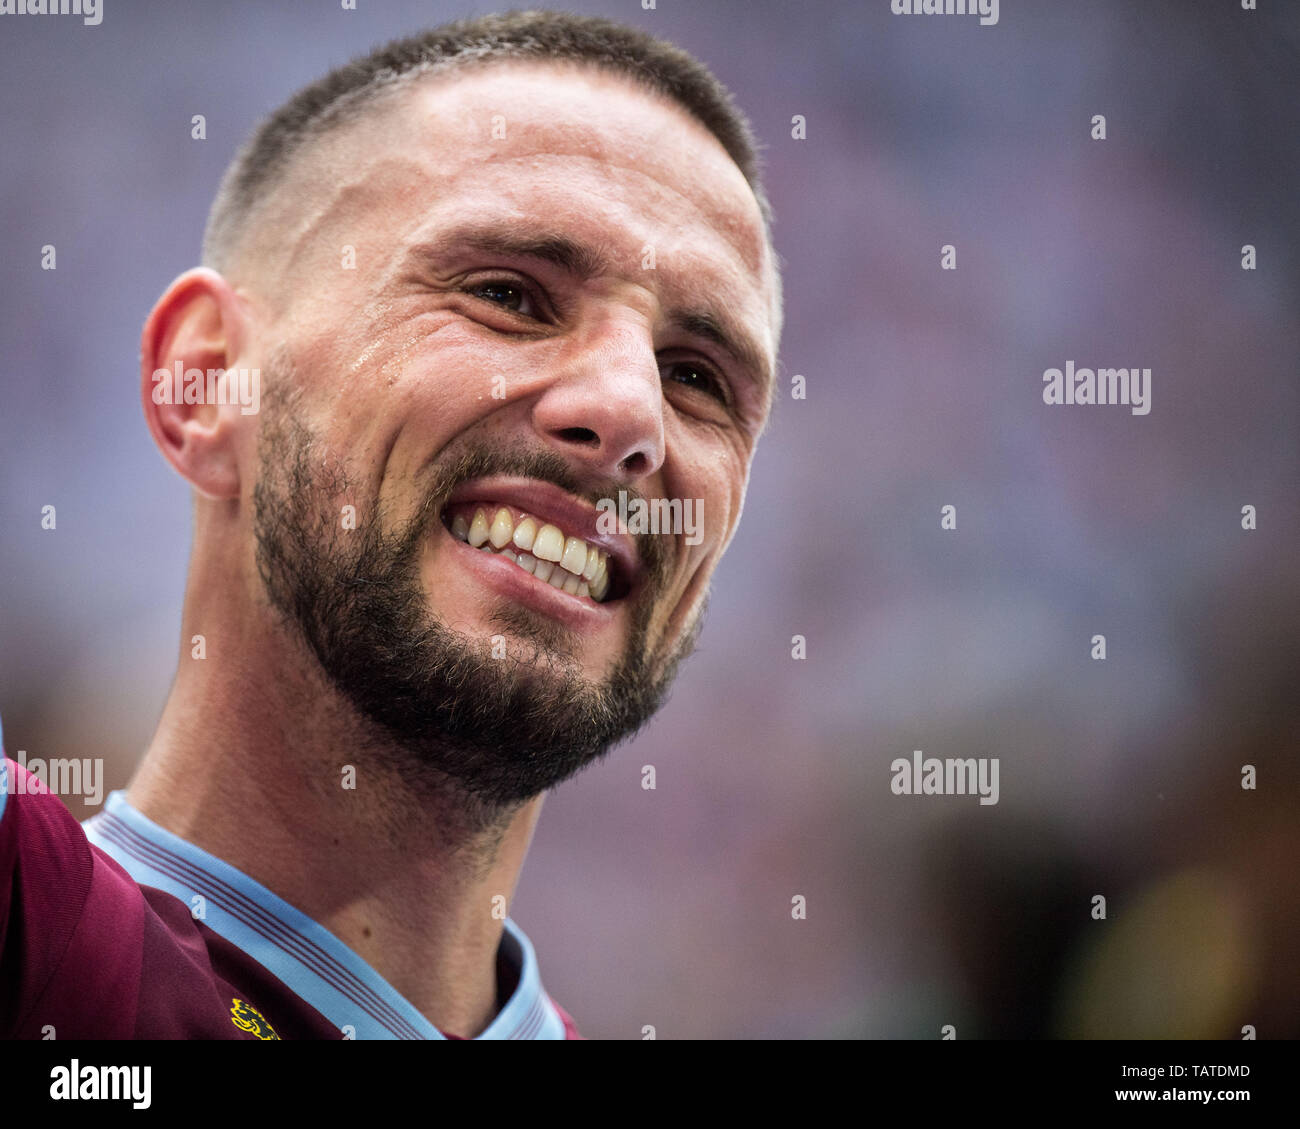 LONDON, ENGLAND - MAY 27: Conor Hourihane of Aston Villa celebrate during the Sky Bet Championship Play-off Final match between Aston Villa and Derby County at Wembley Stadium on May 27, 2019 in London, United Kingdom. (Photo by Sebastian Frej/MB Media) Stock Photo